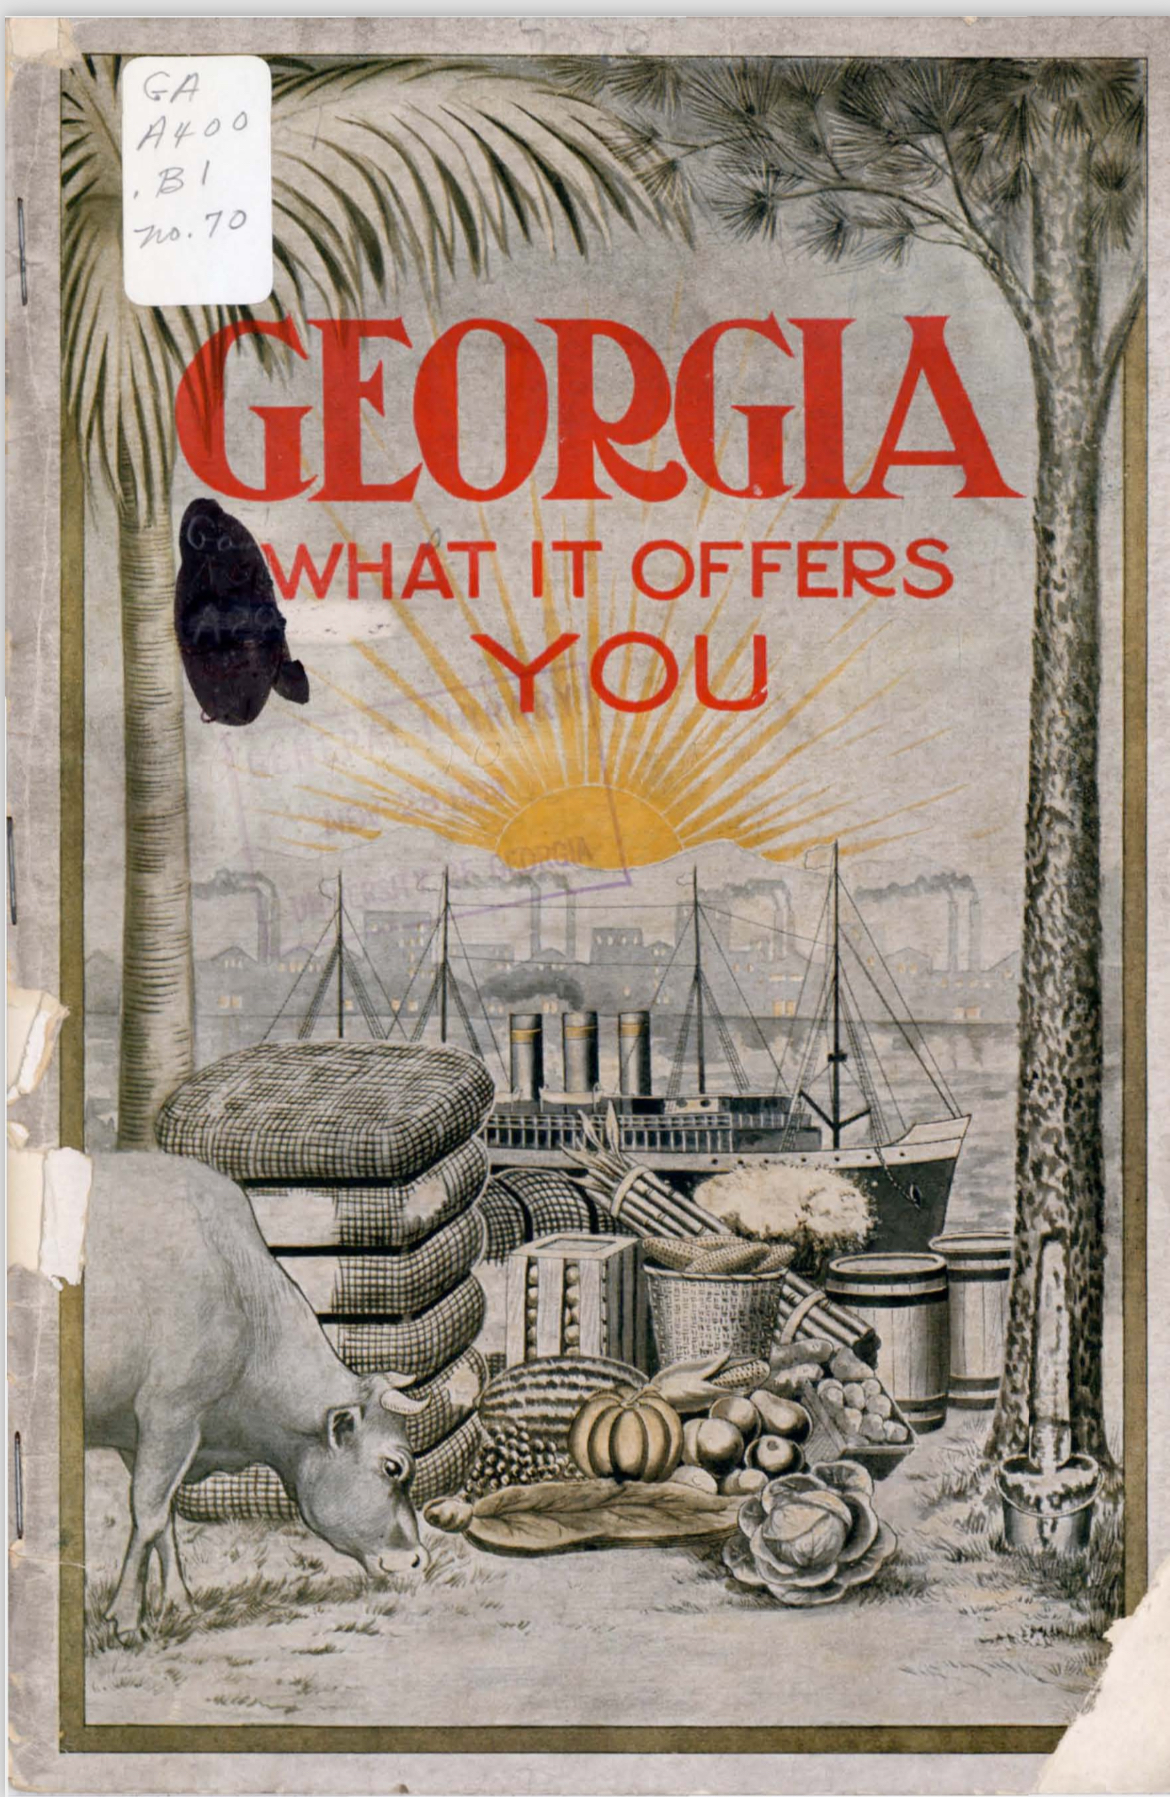 (1916) Cover of the 1916 ag handbook.